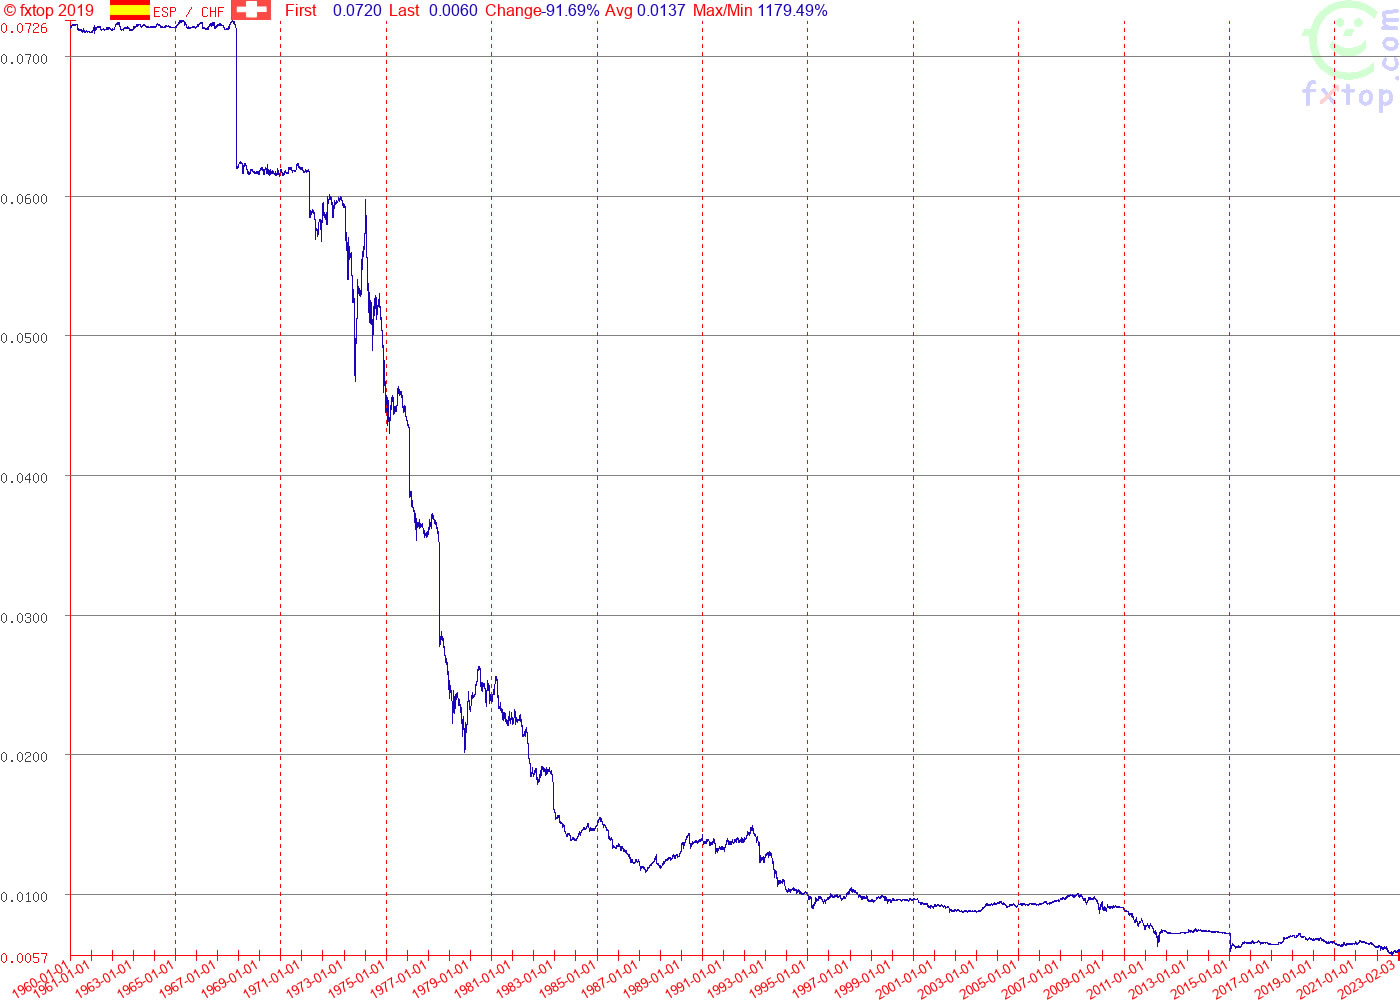 Graph of the exchange rate of the Spanish peseta (ESP) against the Swiss franc (CHF) 1953-2023.